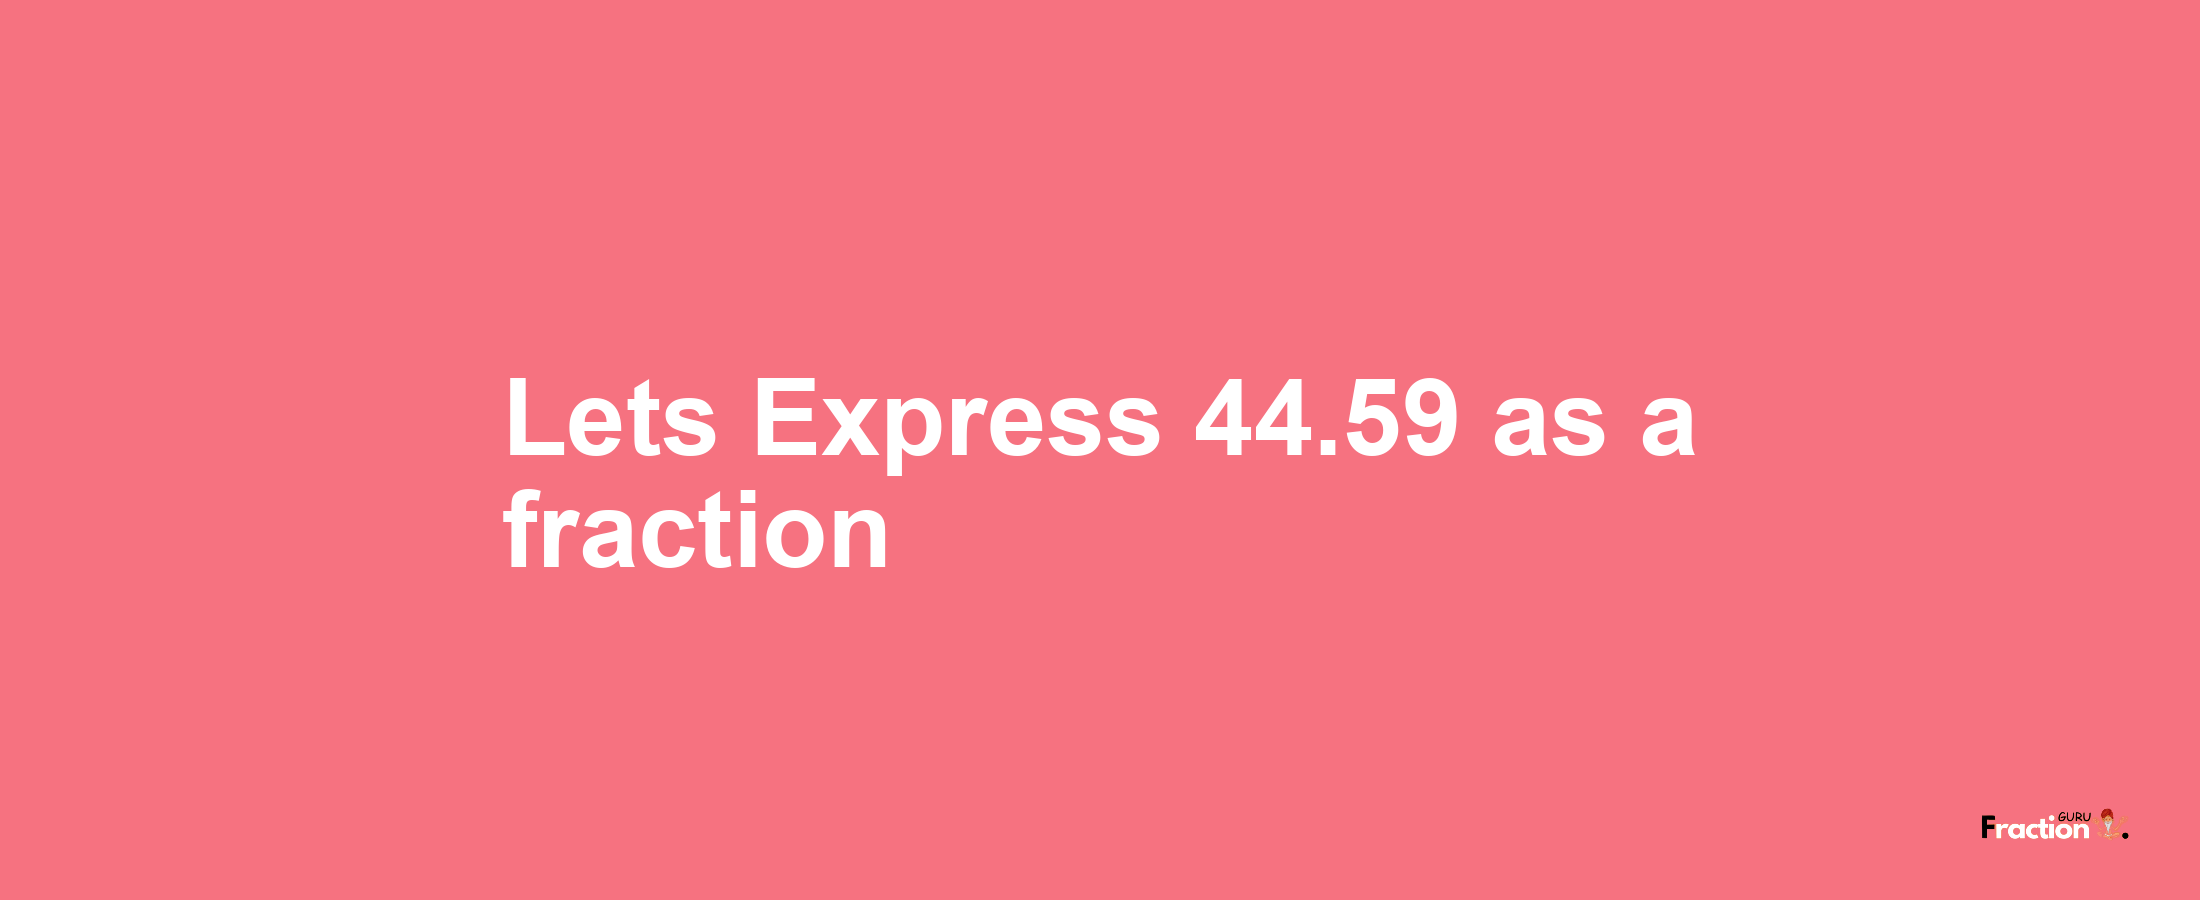 Lets Express 44.59 as afraction